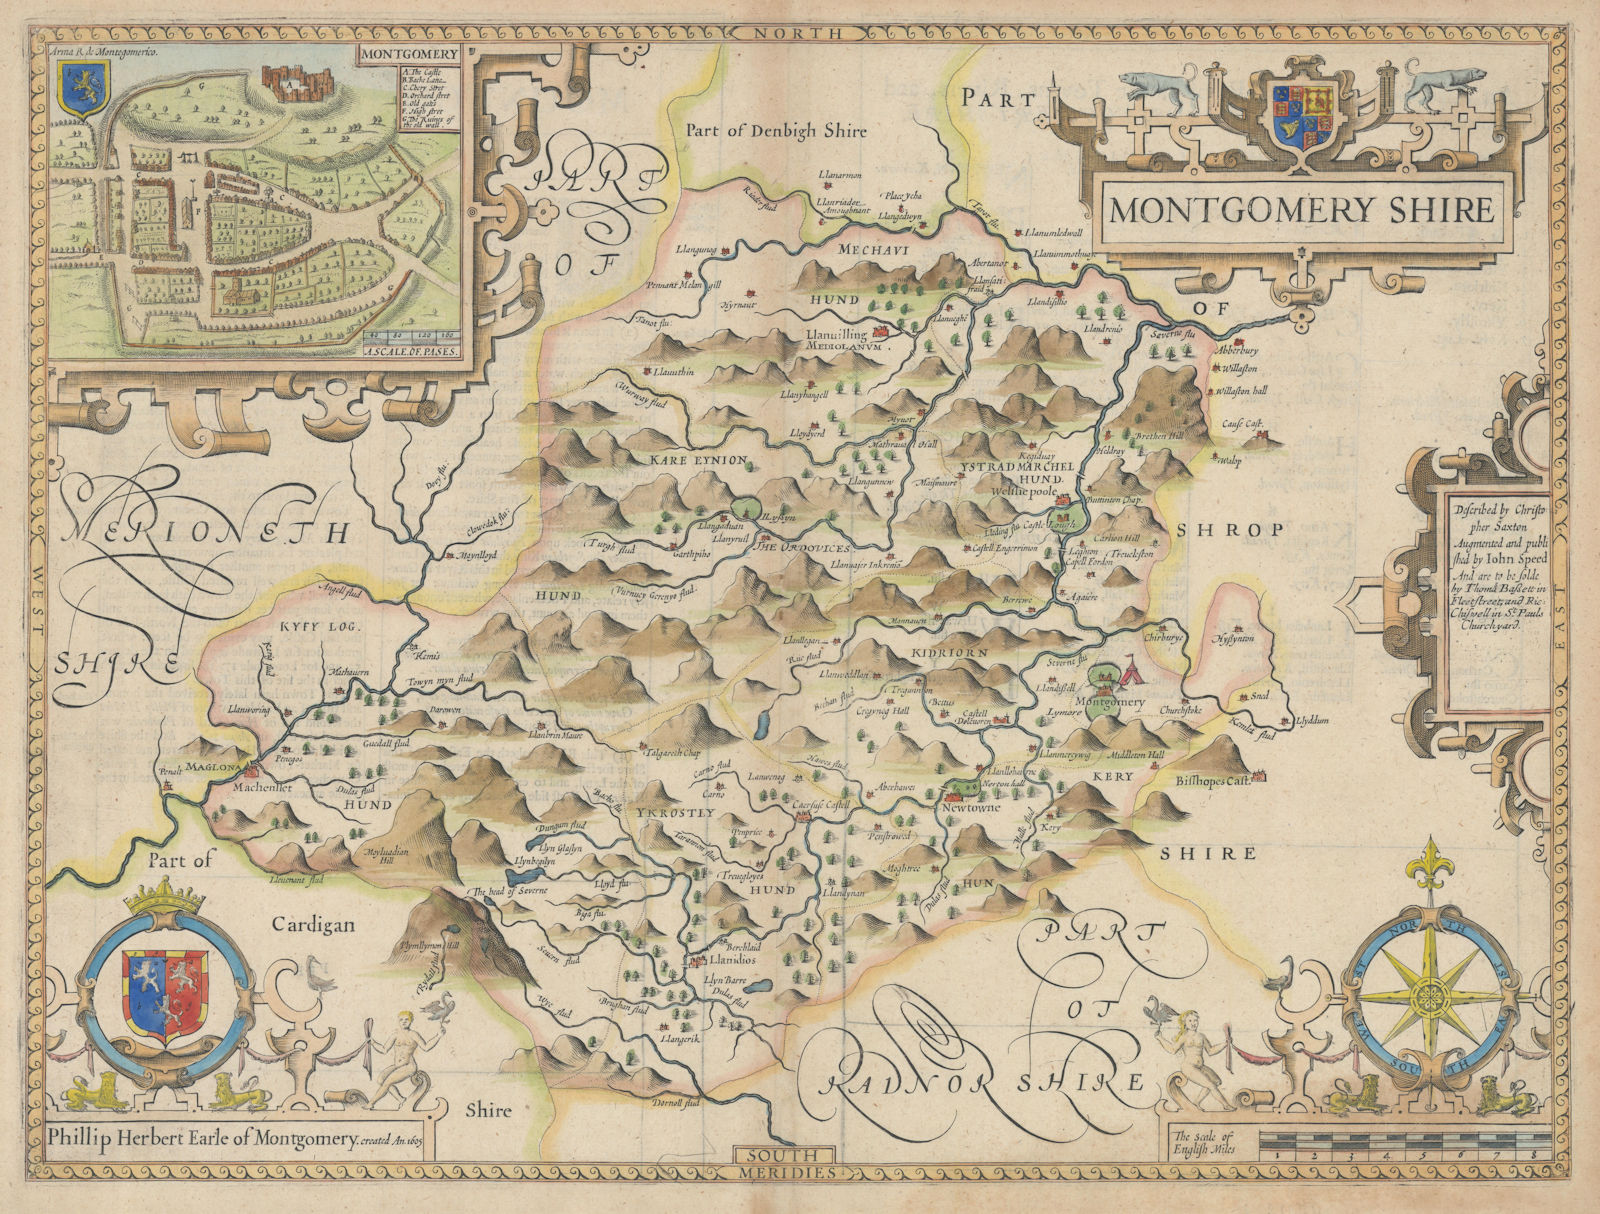 Associate Product Montgomeryshire county map by John Speed. Bassett & Chiswell edition 1676